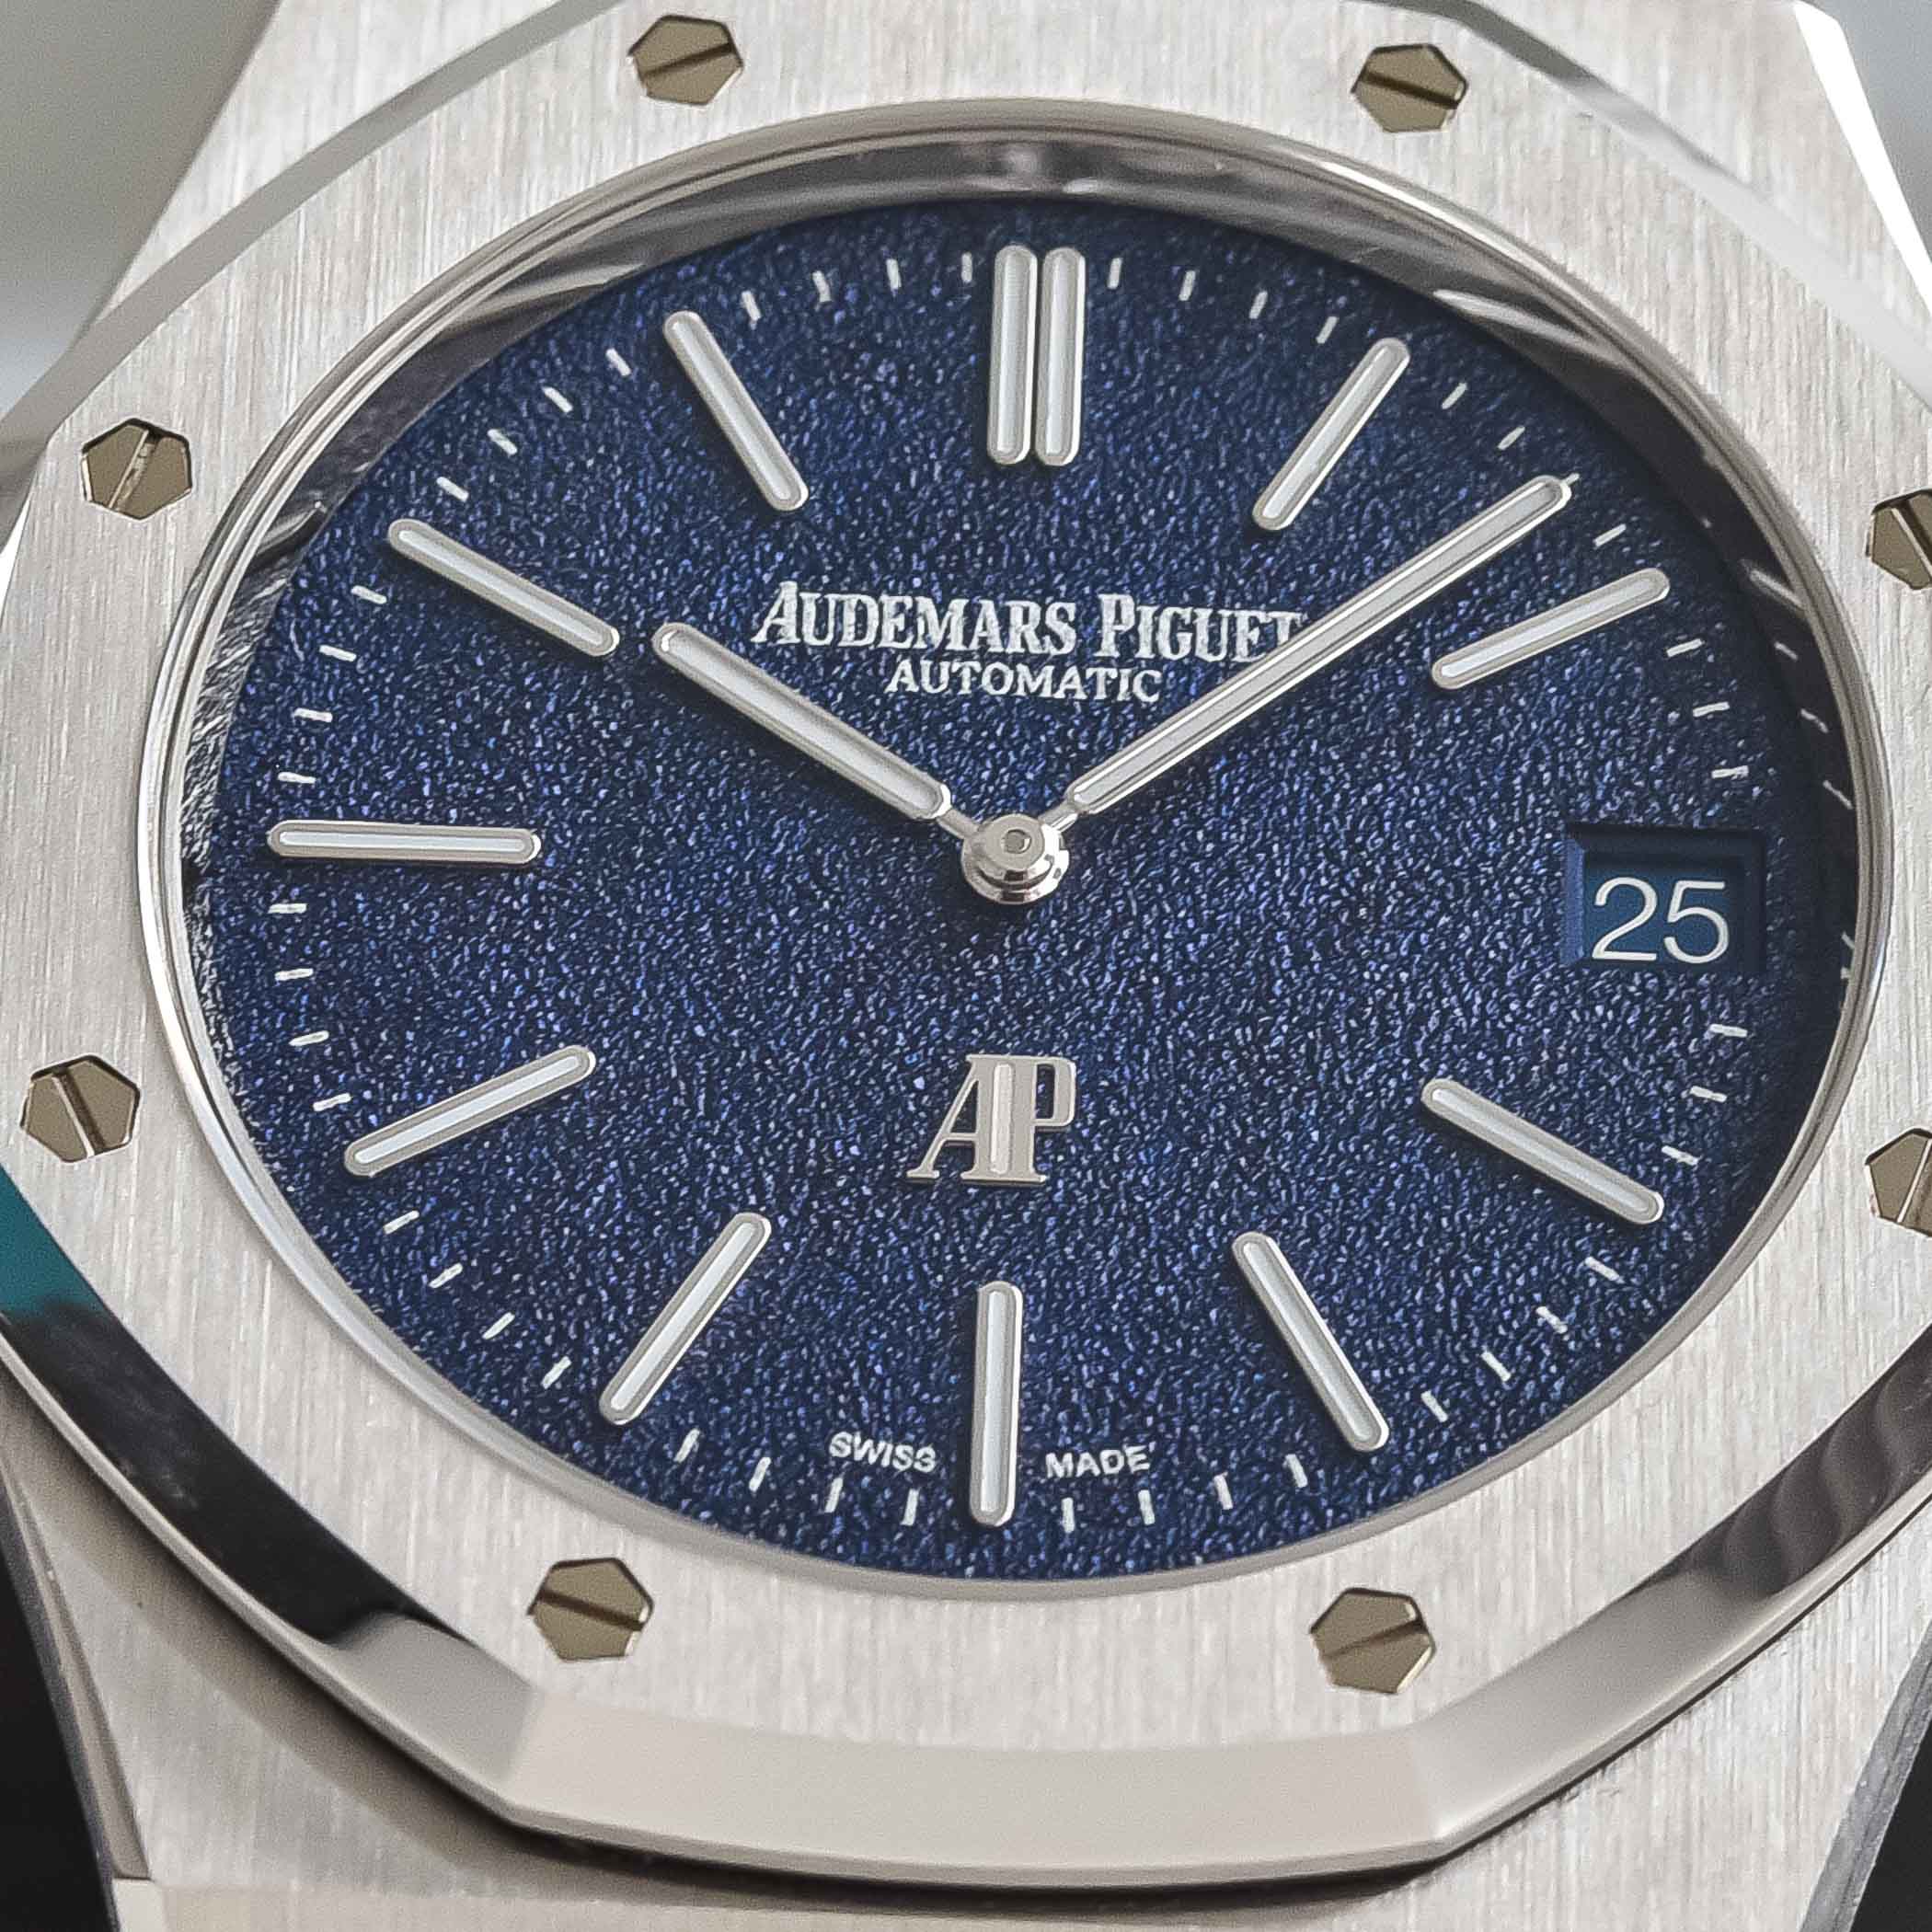 Audemars Piguet Royal Oak Jumbo Extra-Thin 16202BC Tuscan Dial Blue Grained White Gold - review - 2